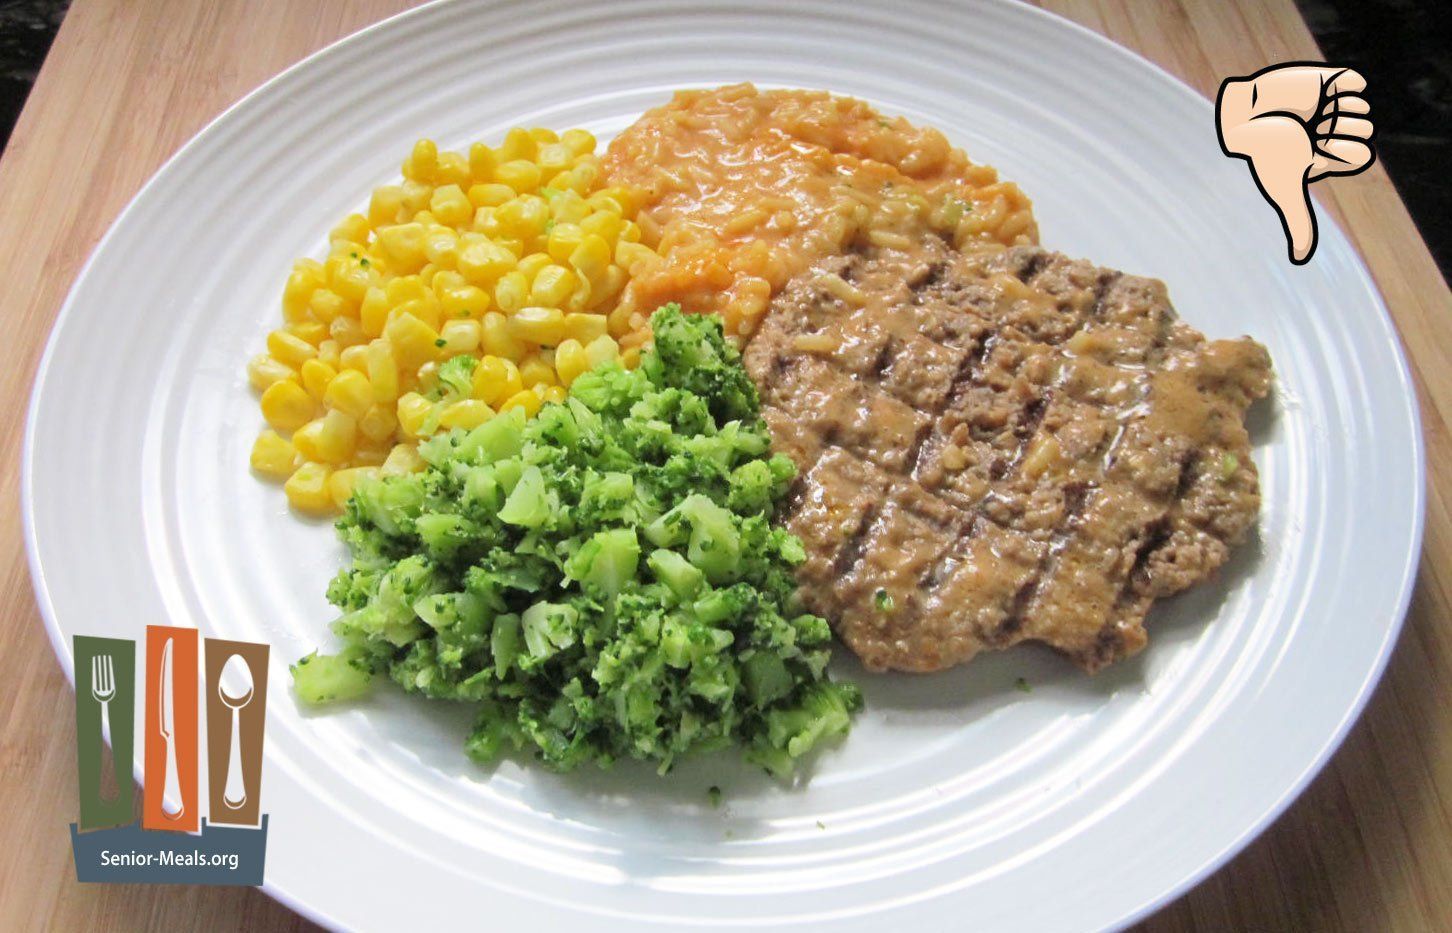 Beef Patty with Chipotle Cheesy Rice, Corn and Broccoli